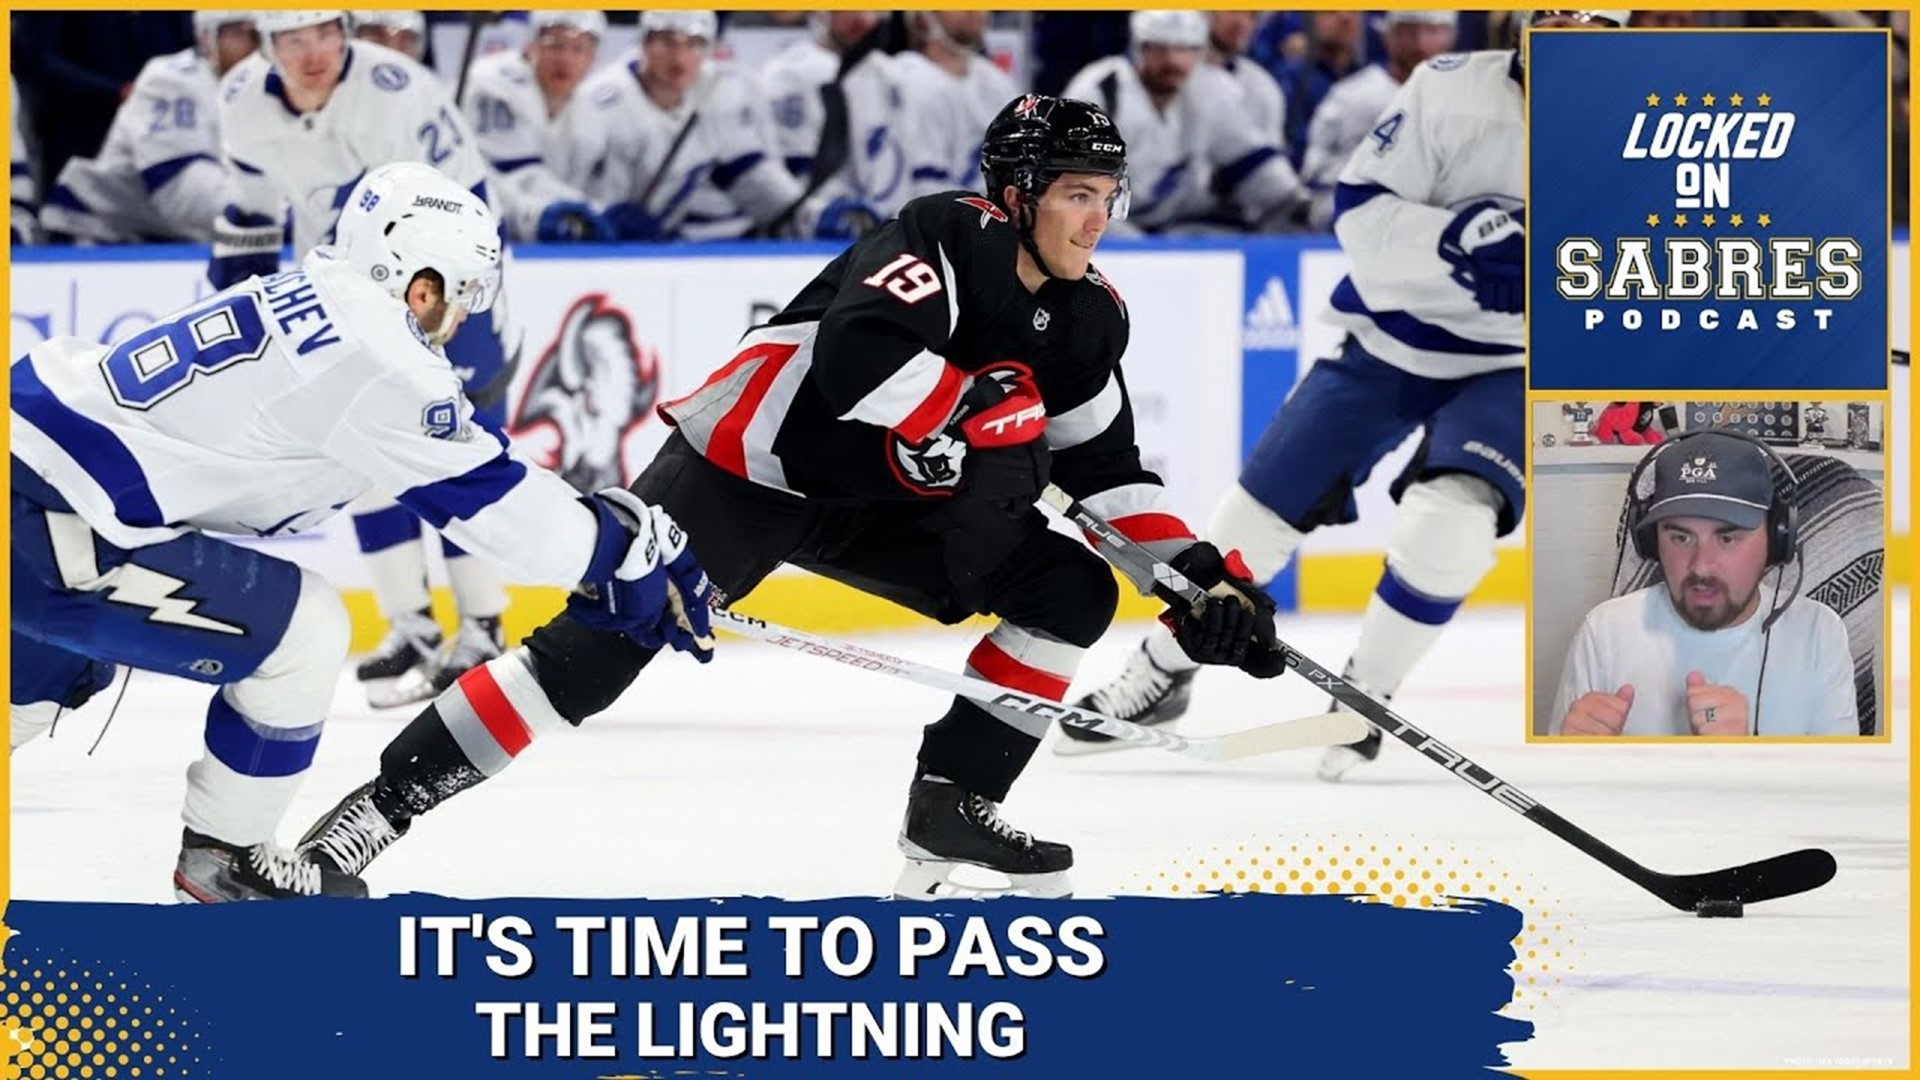 It's time for the Sabres to pass the Lightning